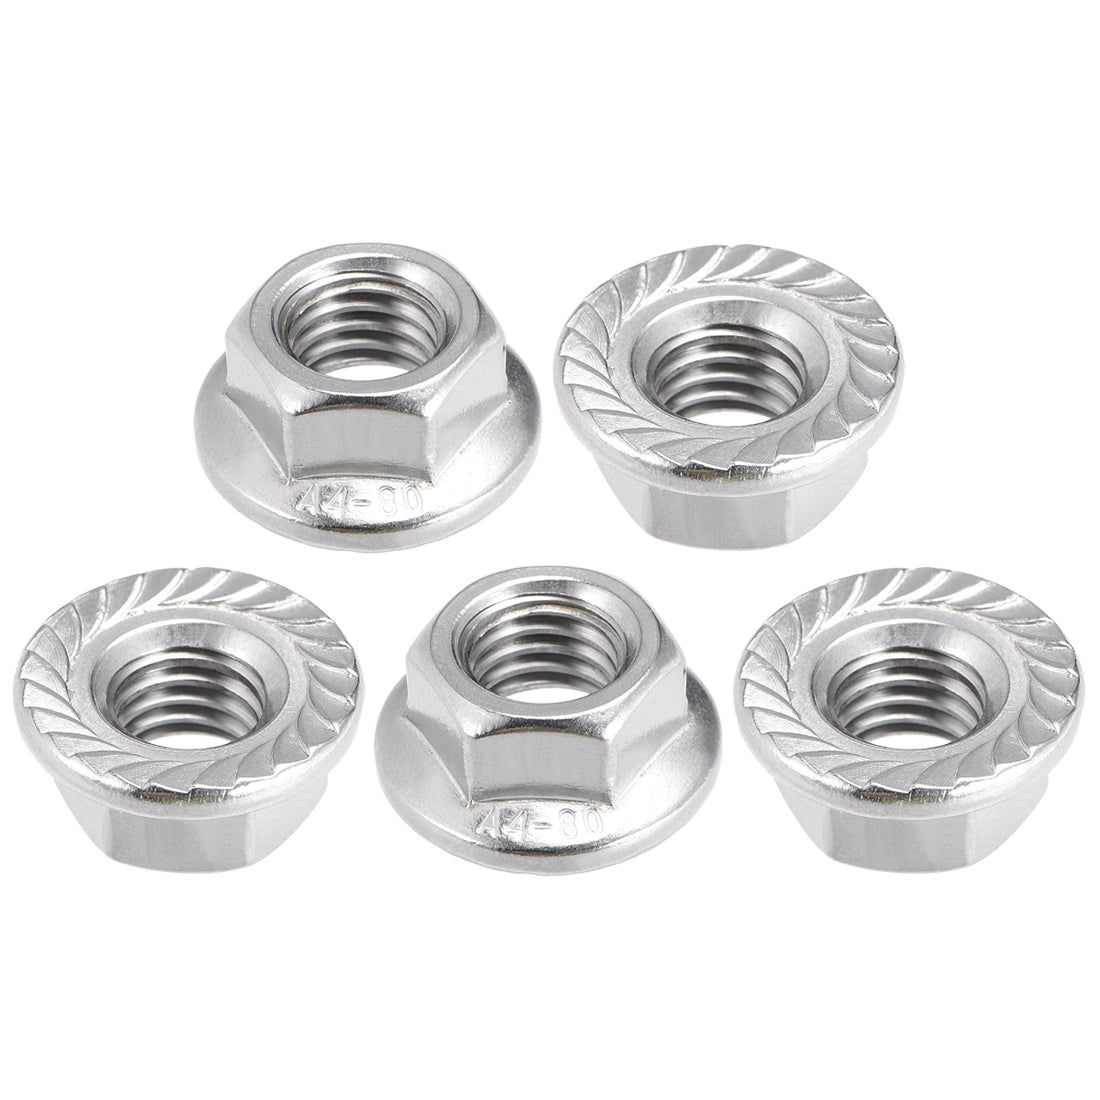 Uxcell Uxcell M12 Serrated Flange Hex Lock Nuts, 201 Stainless Steel, 5 Pcs